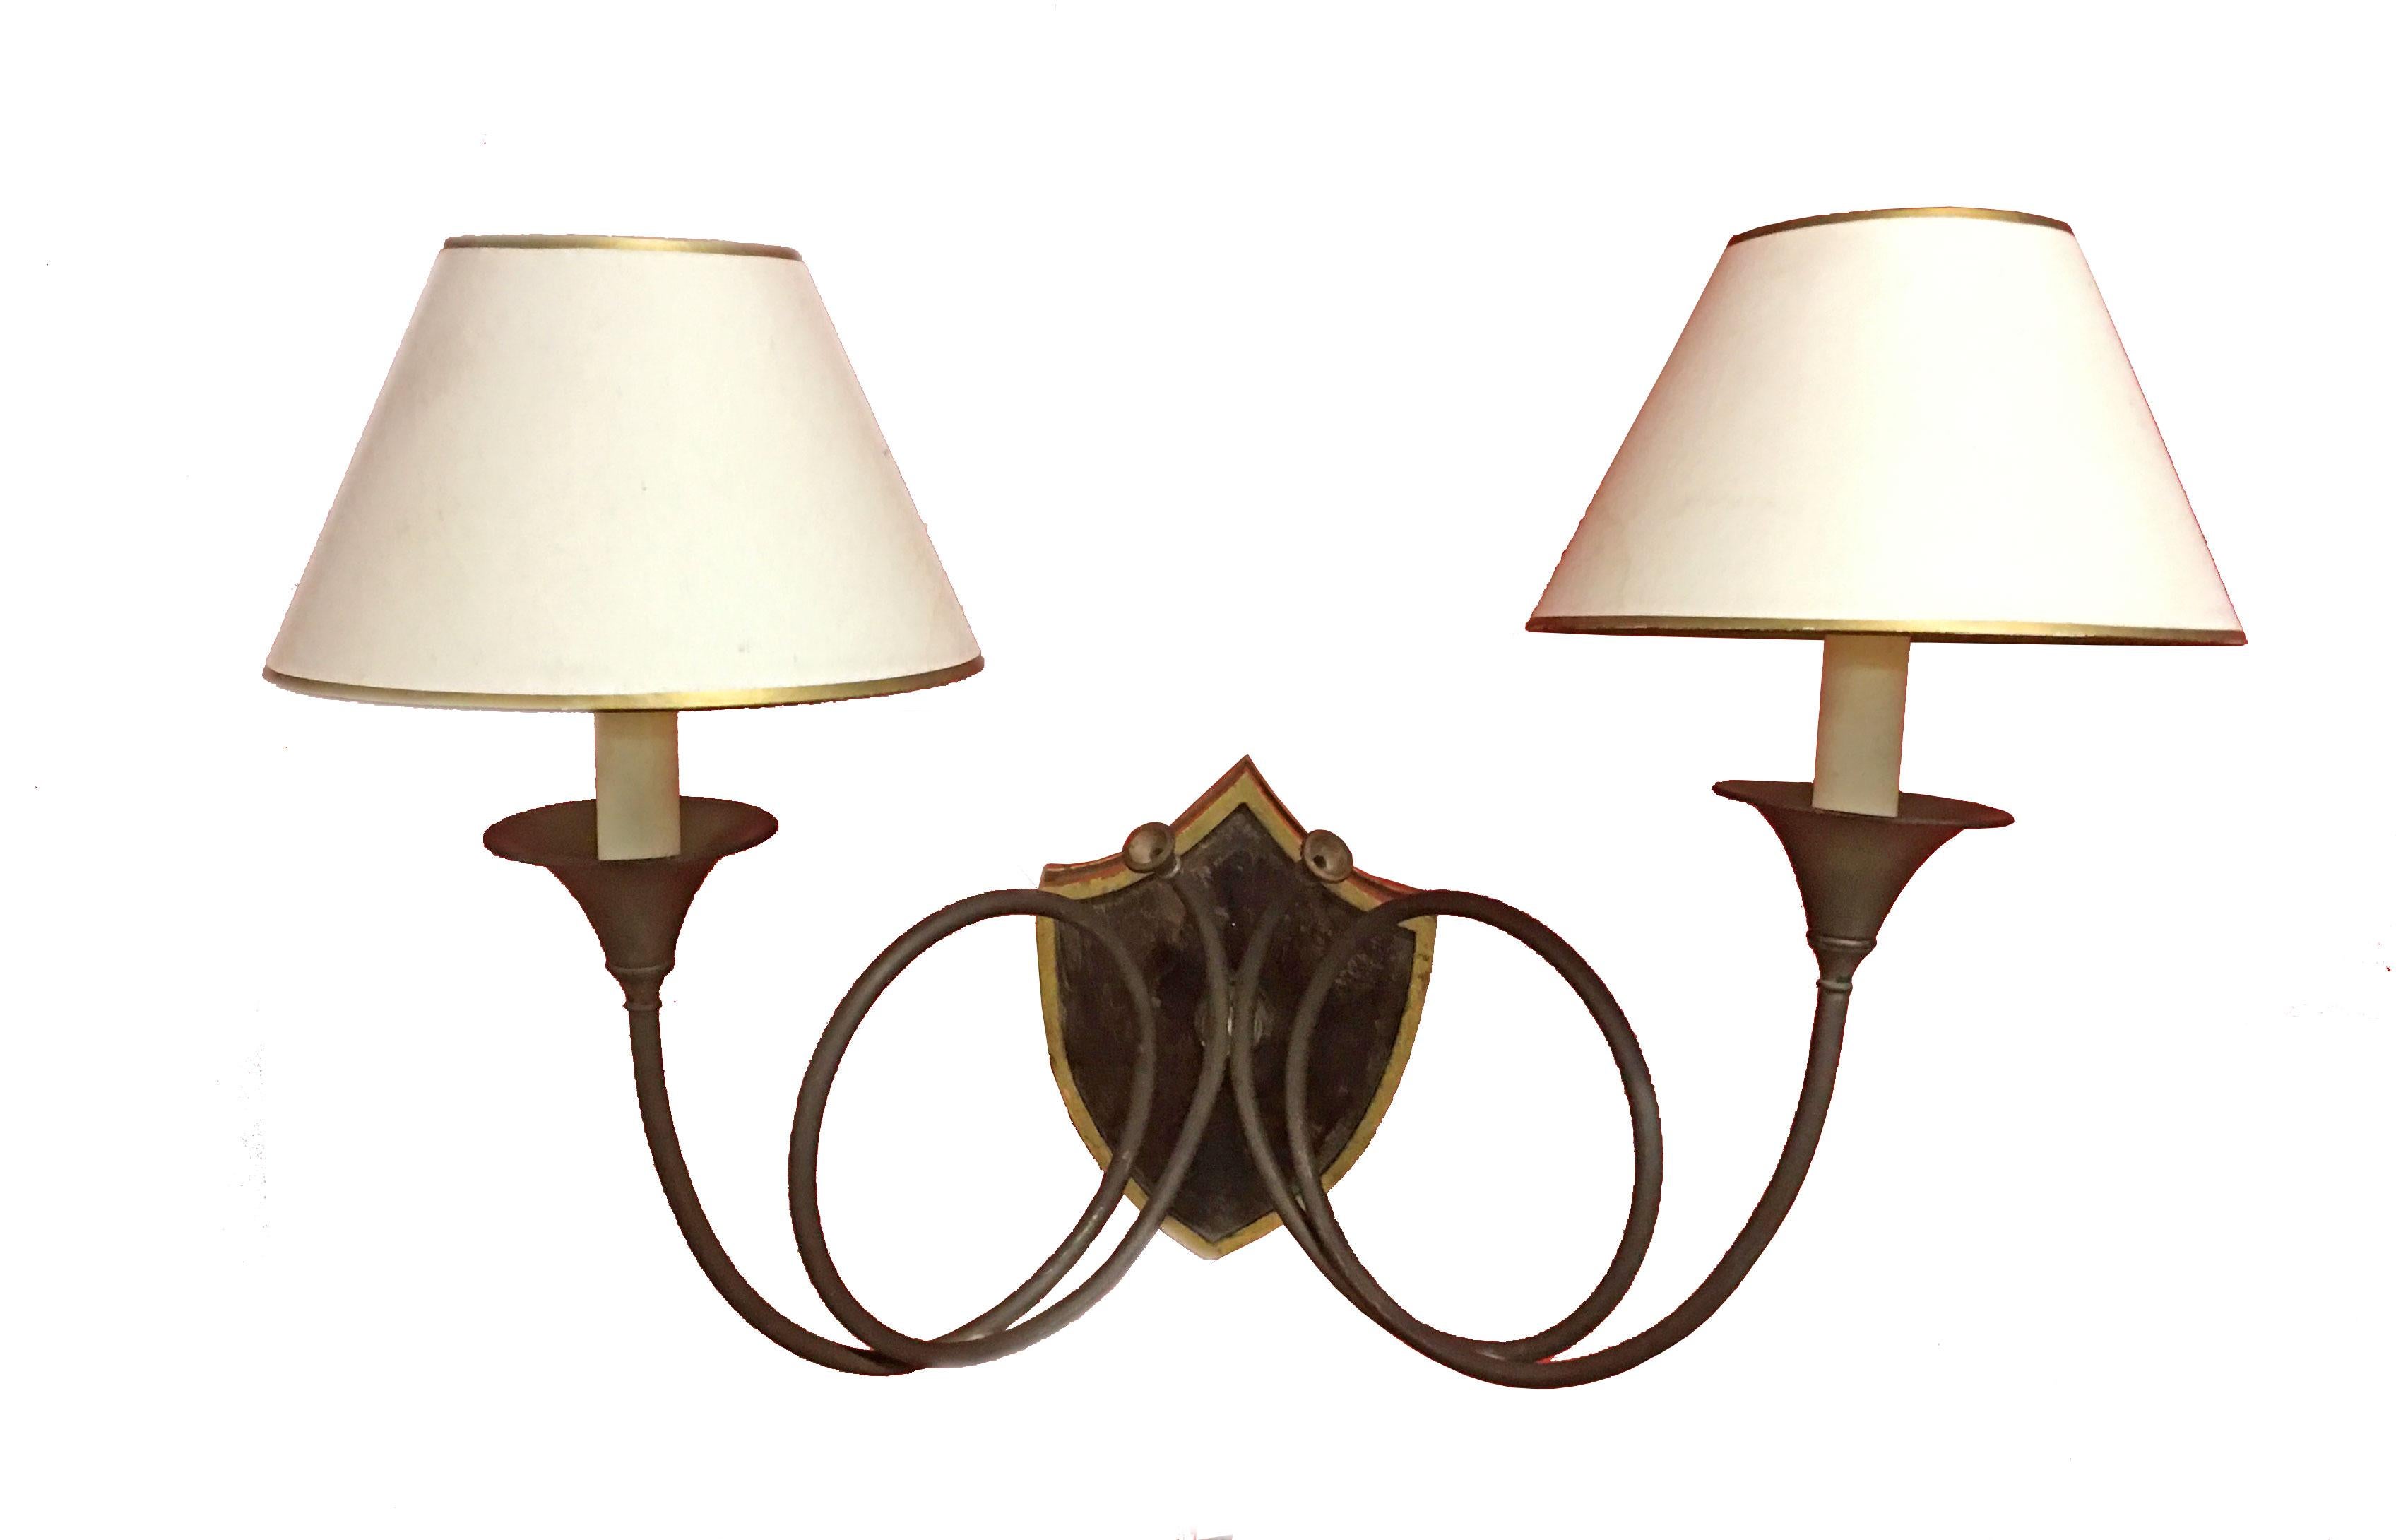 4 large neoclassic Art Deco sconces with hunting horn decor, in bronze and walnut circa 1940
All lampshades are in good condition.
the price is for one
sold in pairs
you can buy 2 or 4 wall lights, thank you